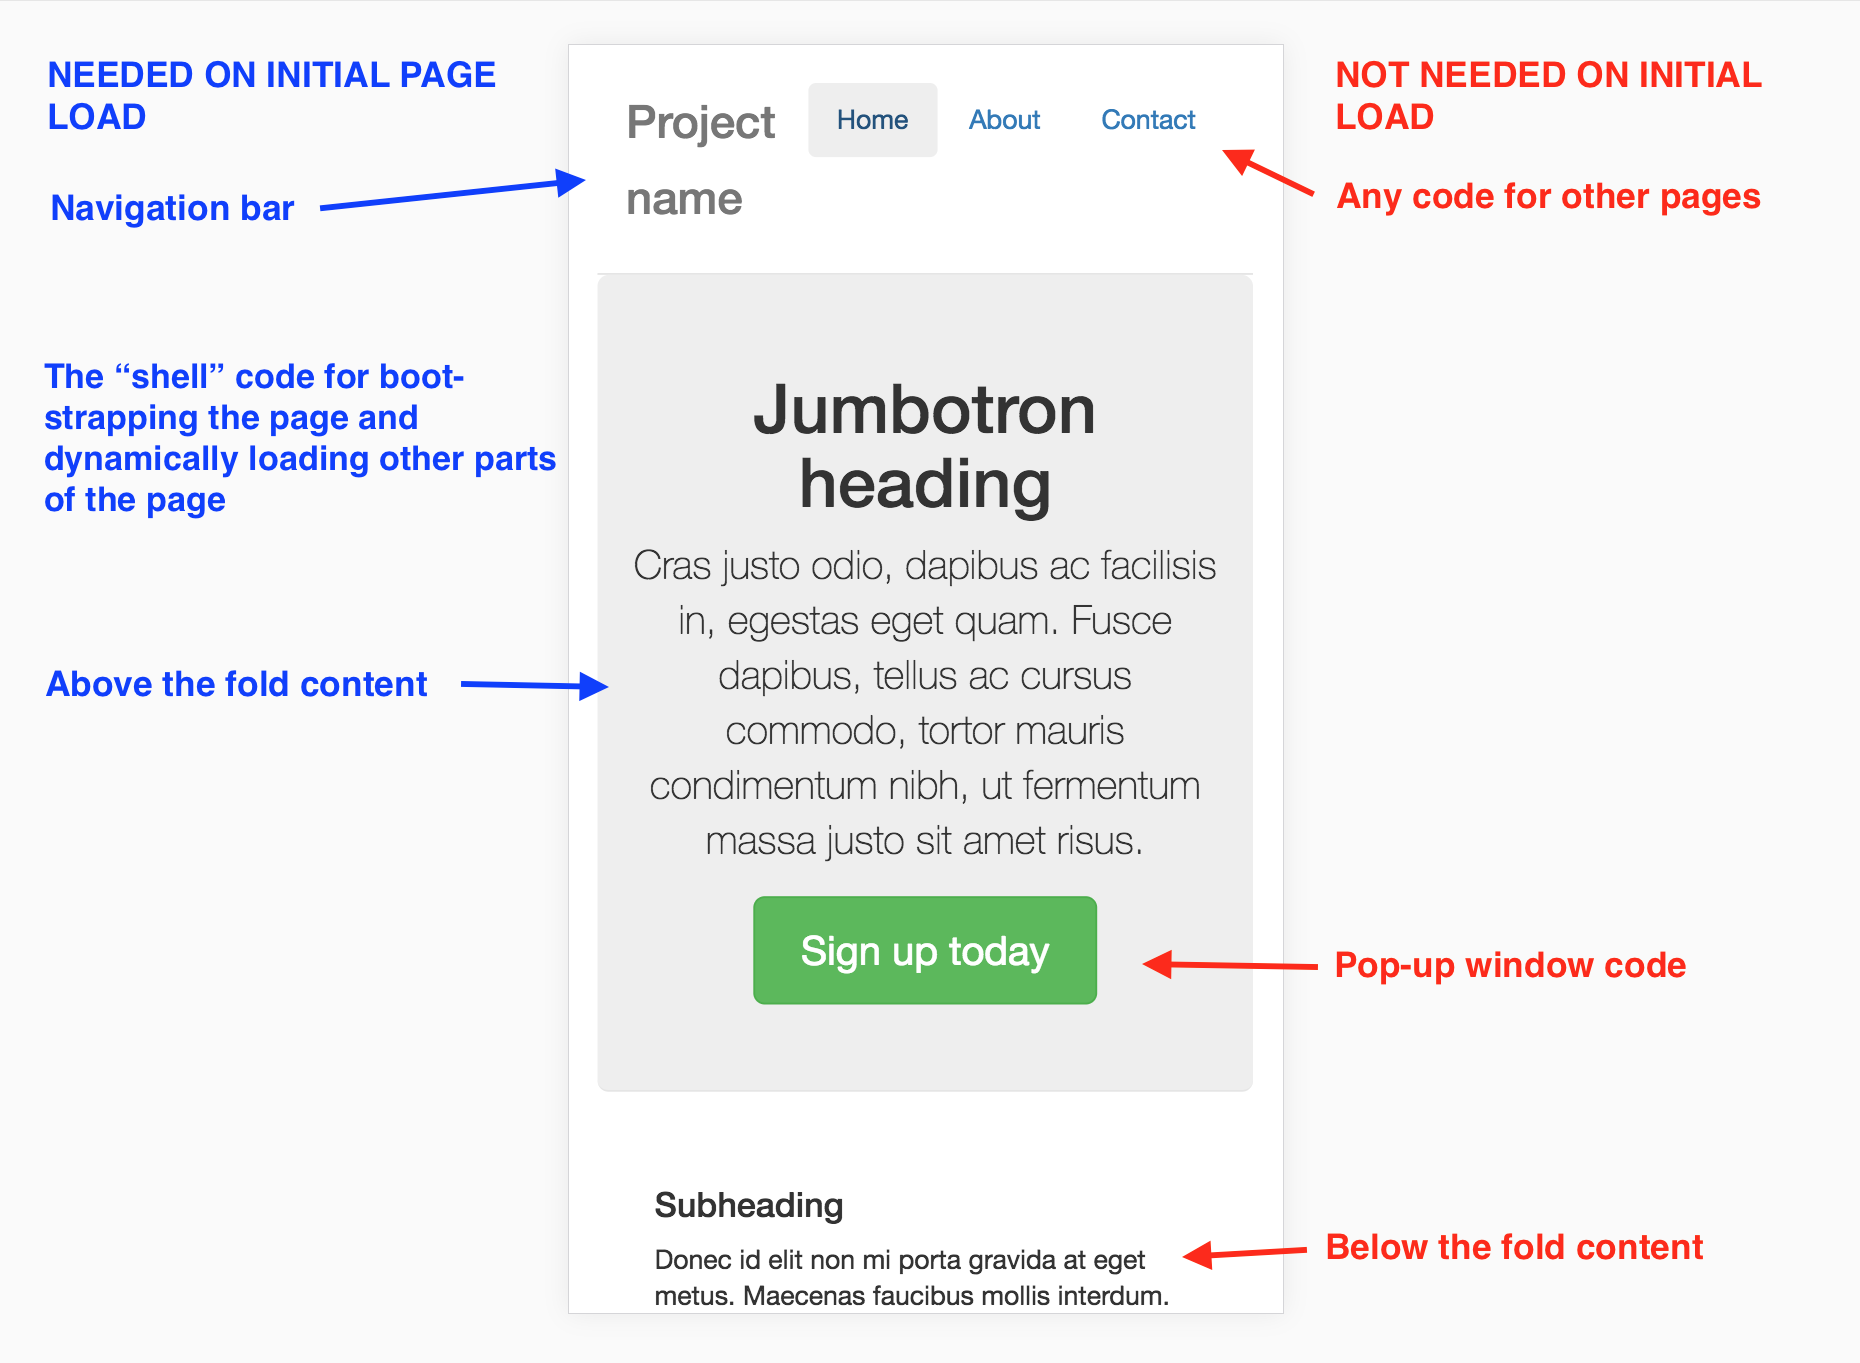 components required for initial page load